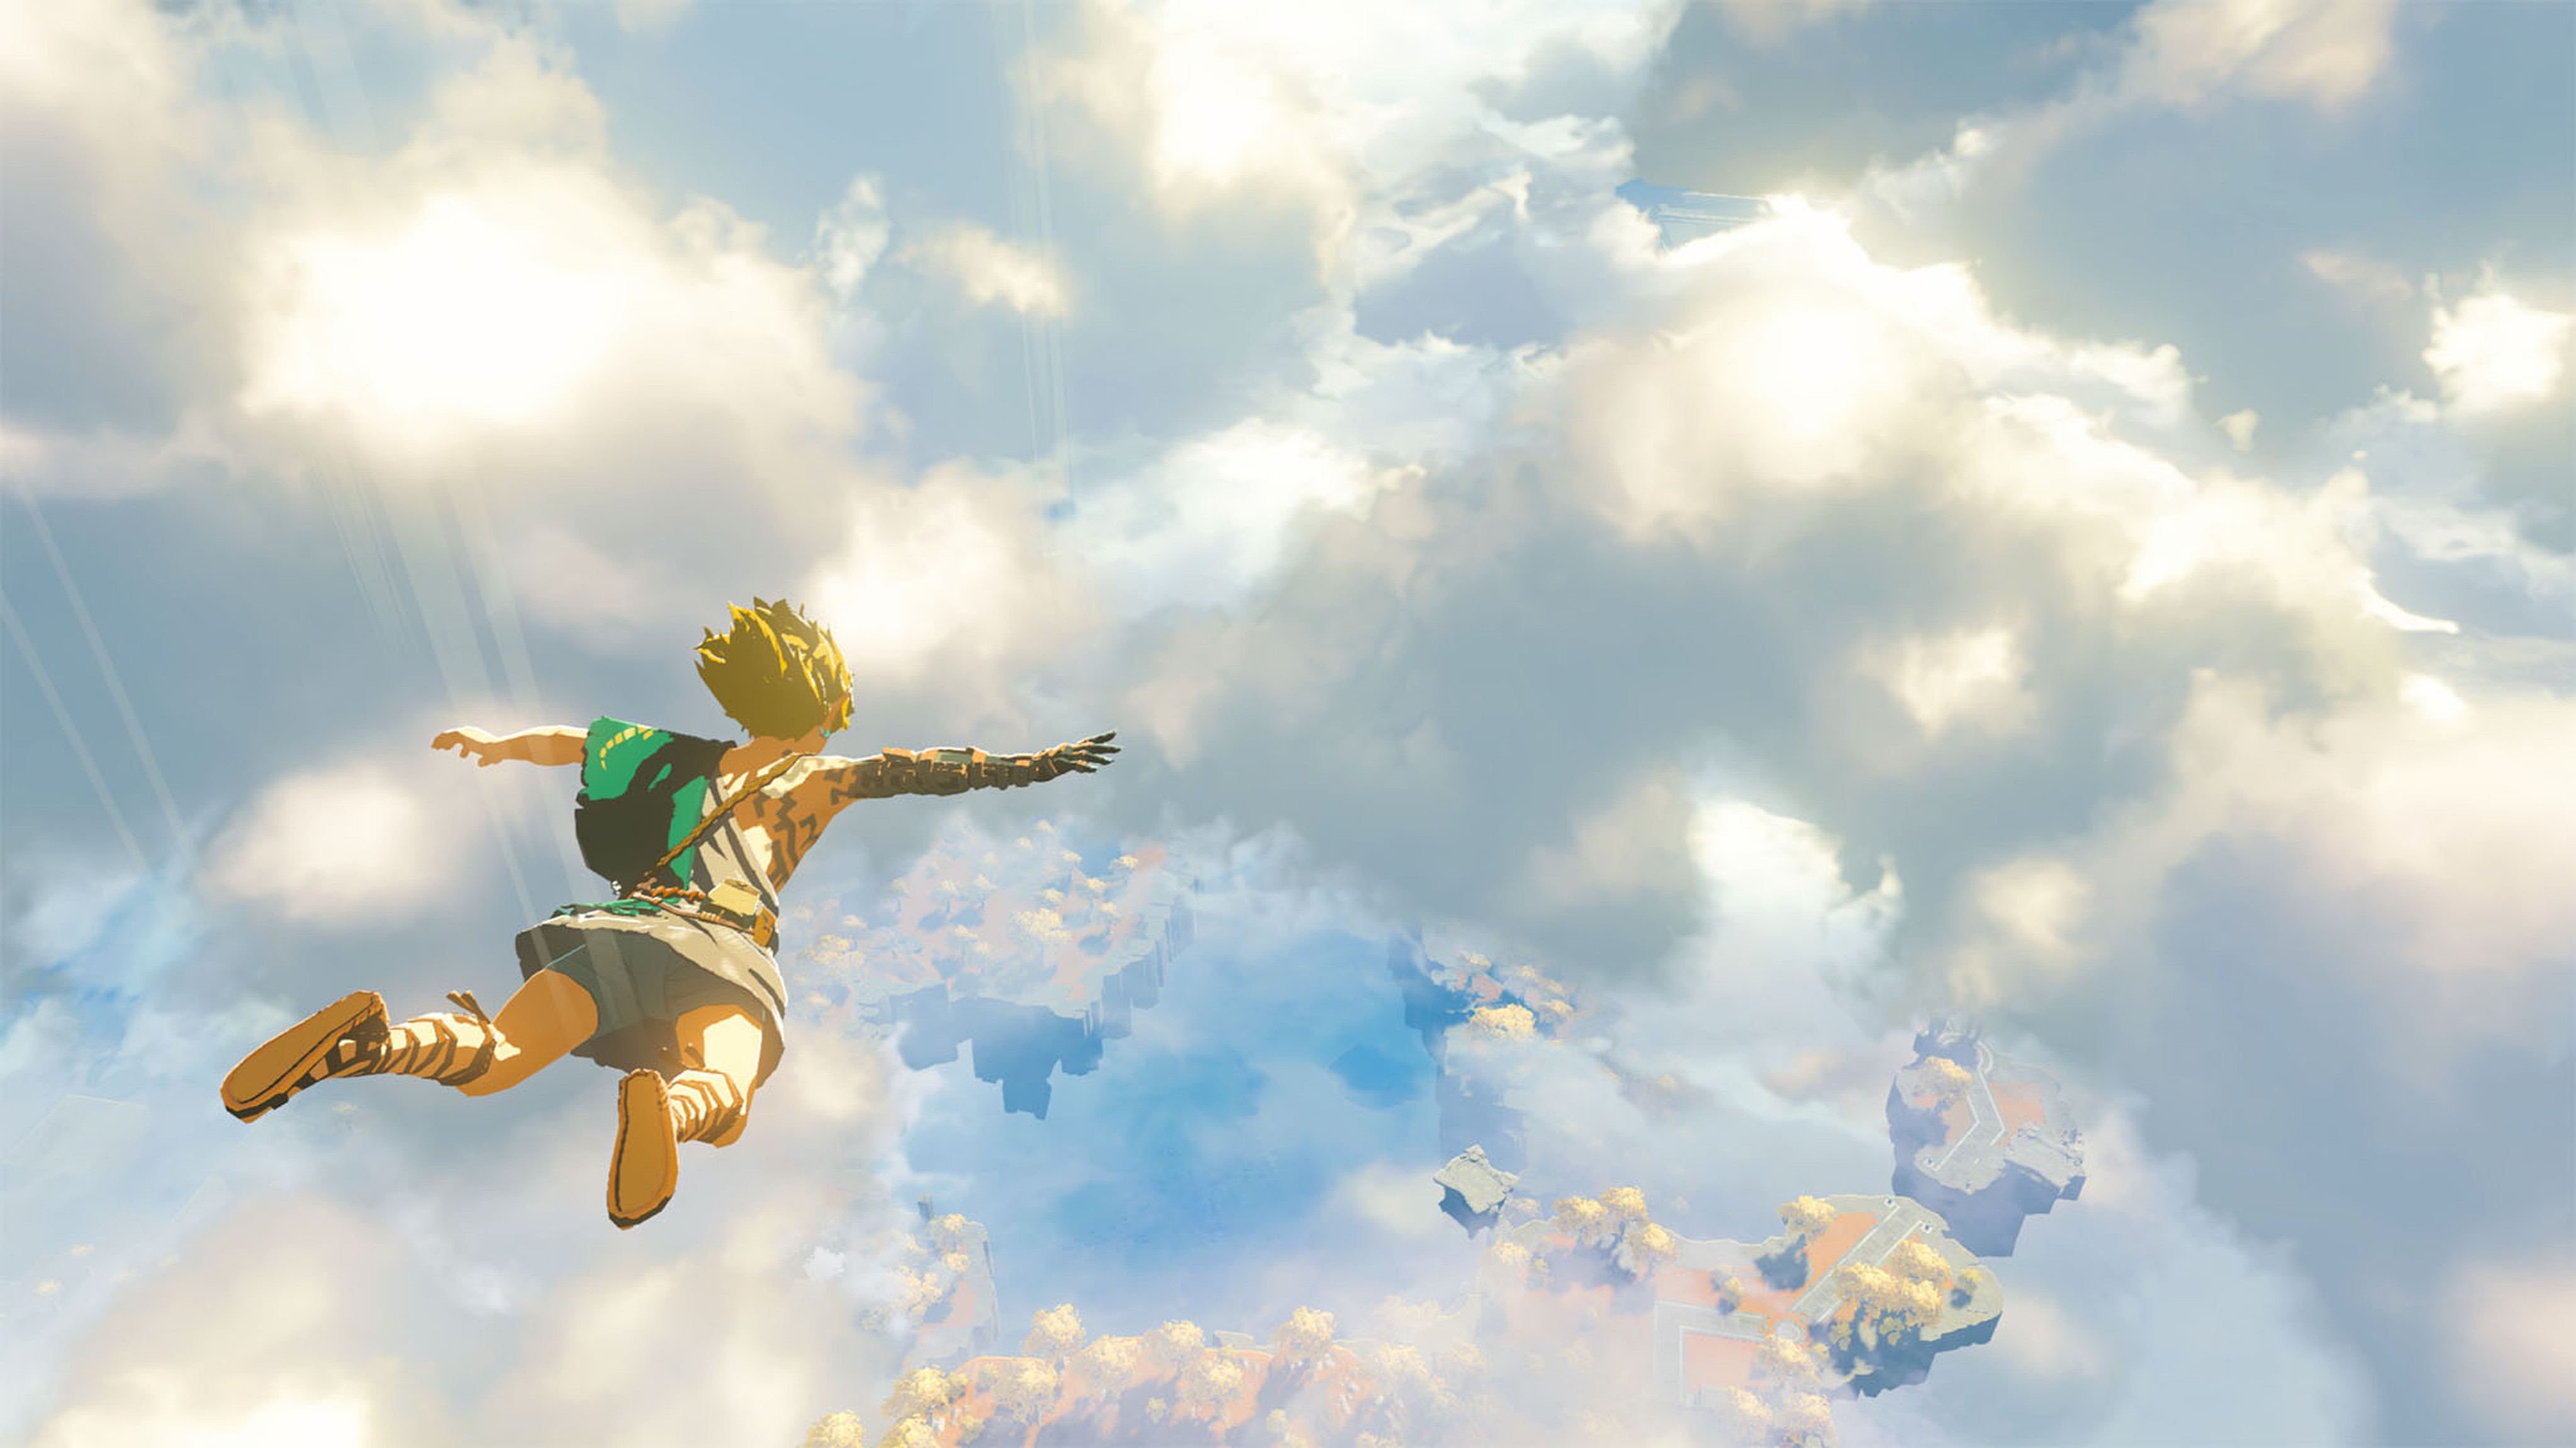 With a new Minecraft-style construction feature, Nintendo game The Legend of Zelda: Tears of the Kingdom (screen grab above) promises to be as exciting as its best-selling predecessor Breath of the Wild - and even more meme-worthy. Photo: Nintendo